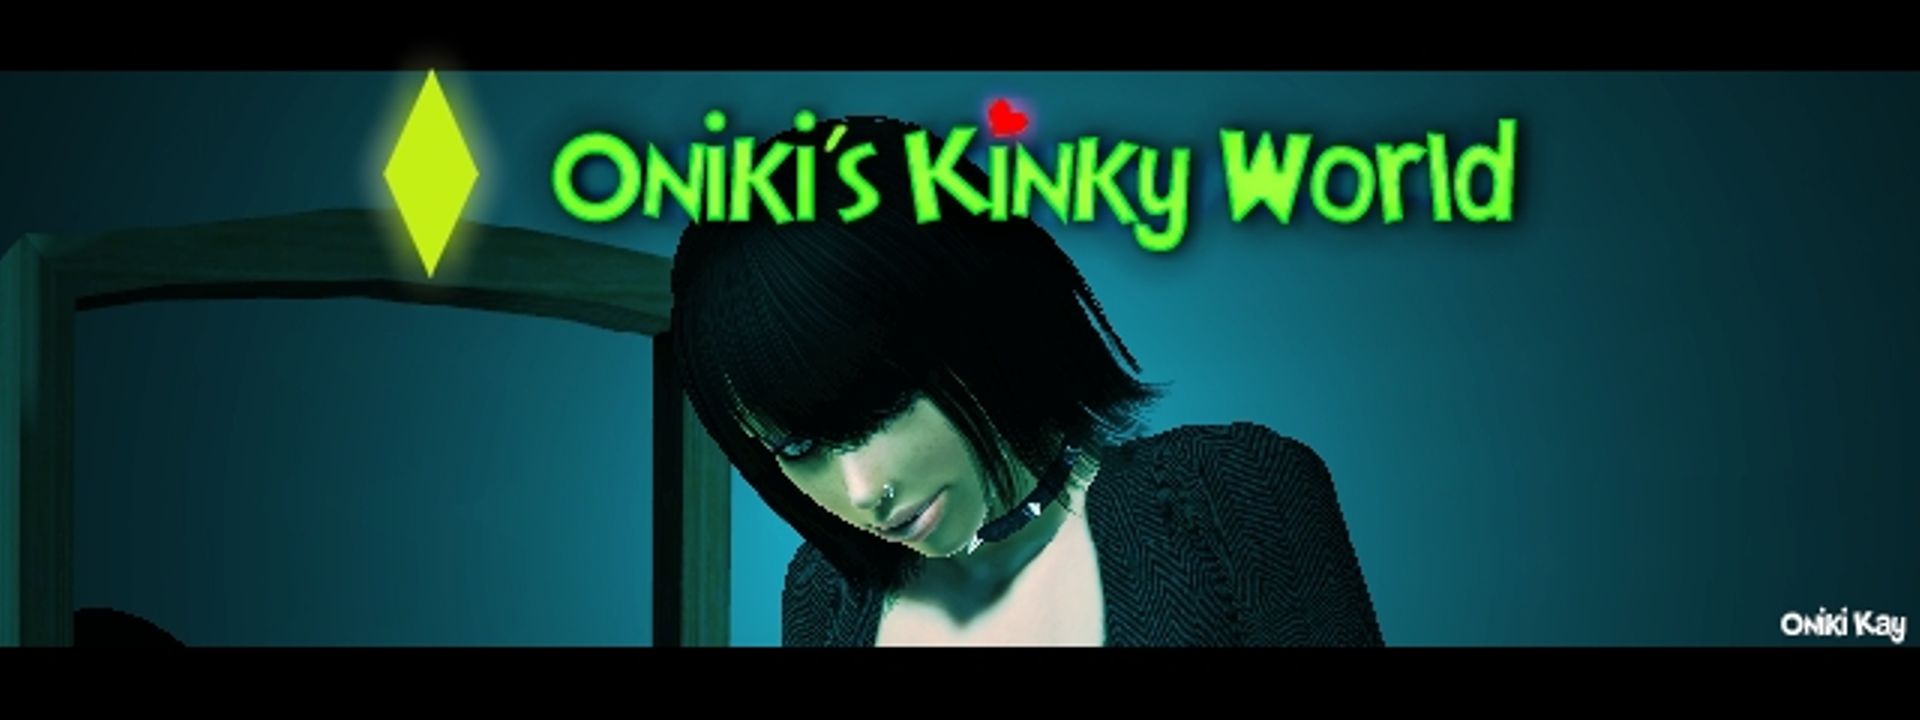 sims 3 kinky world dog male interactions